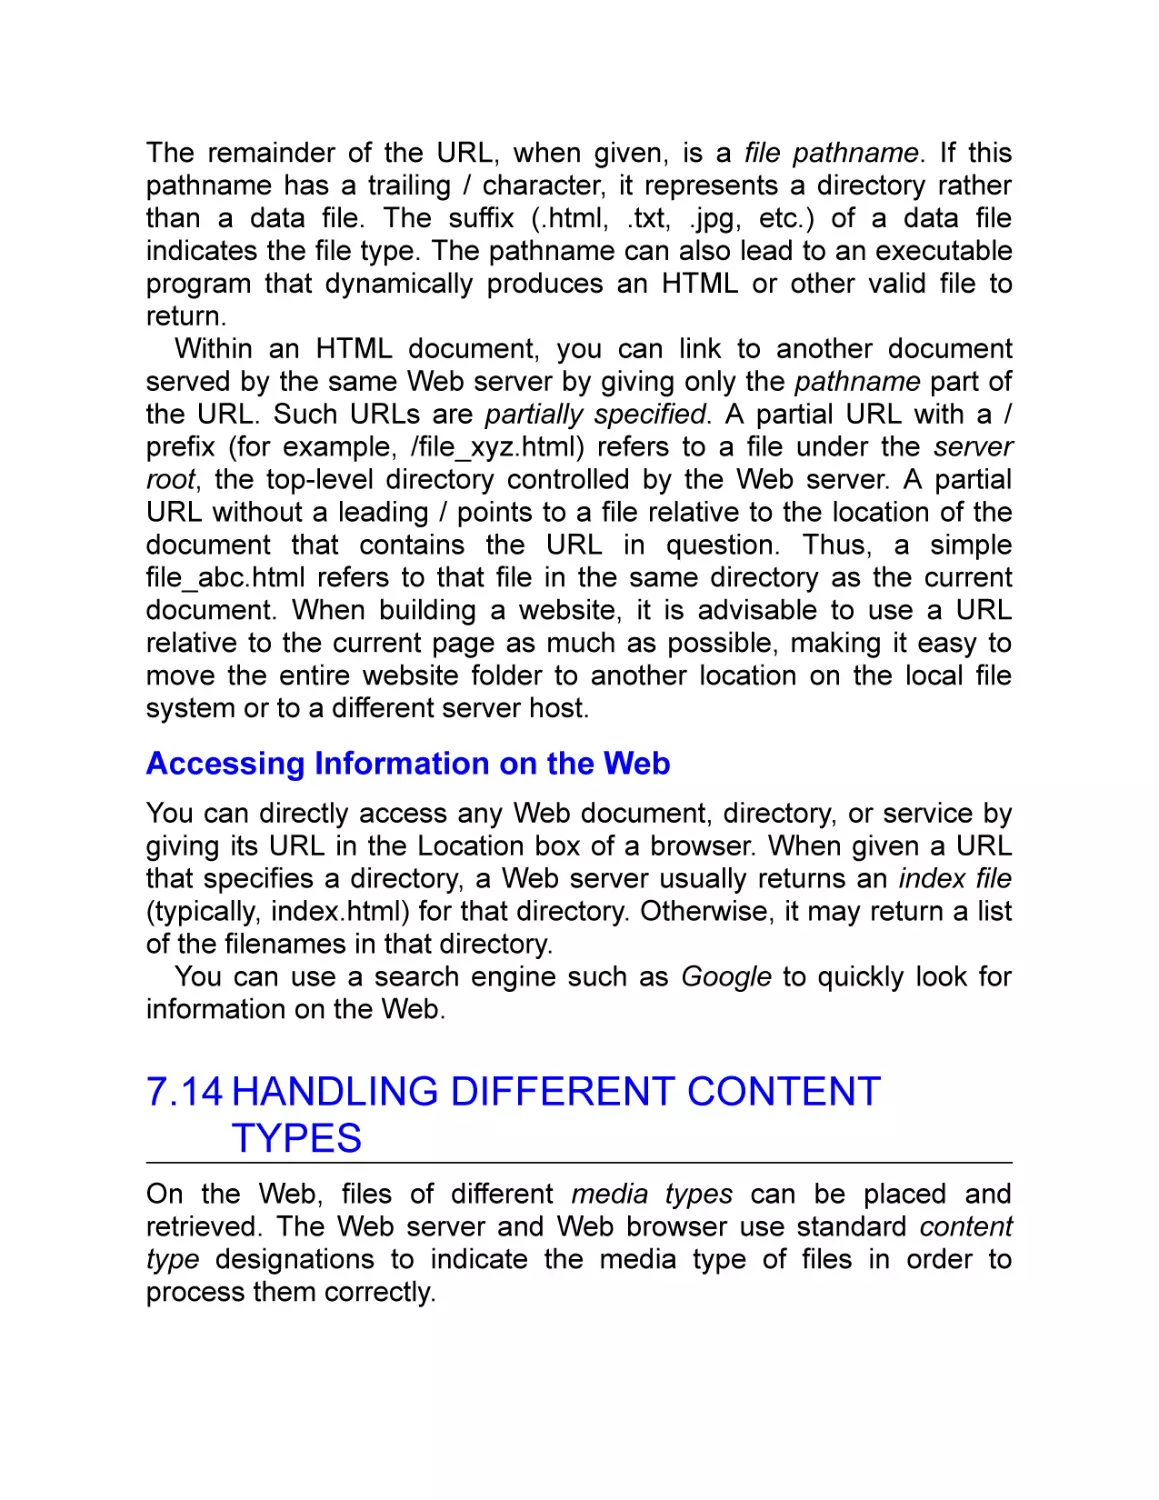 Accessing Information on the Web
7.14 Handling Different Content Types